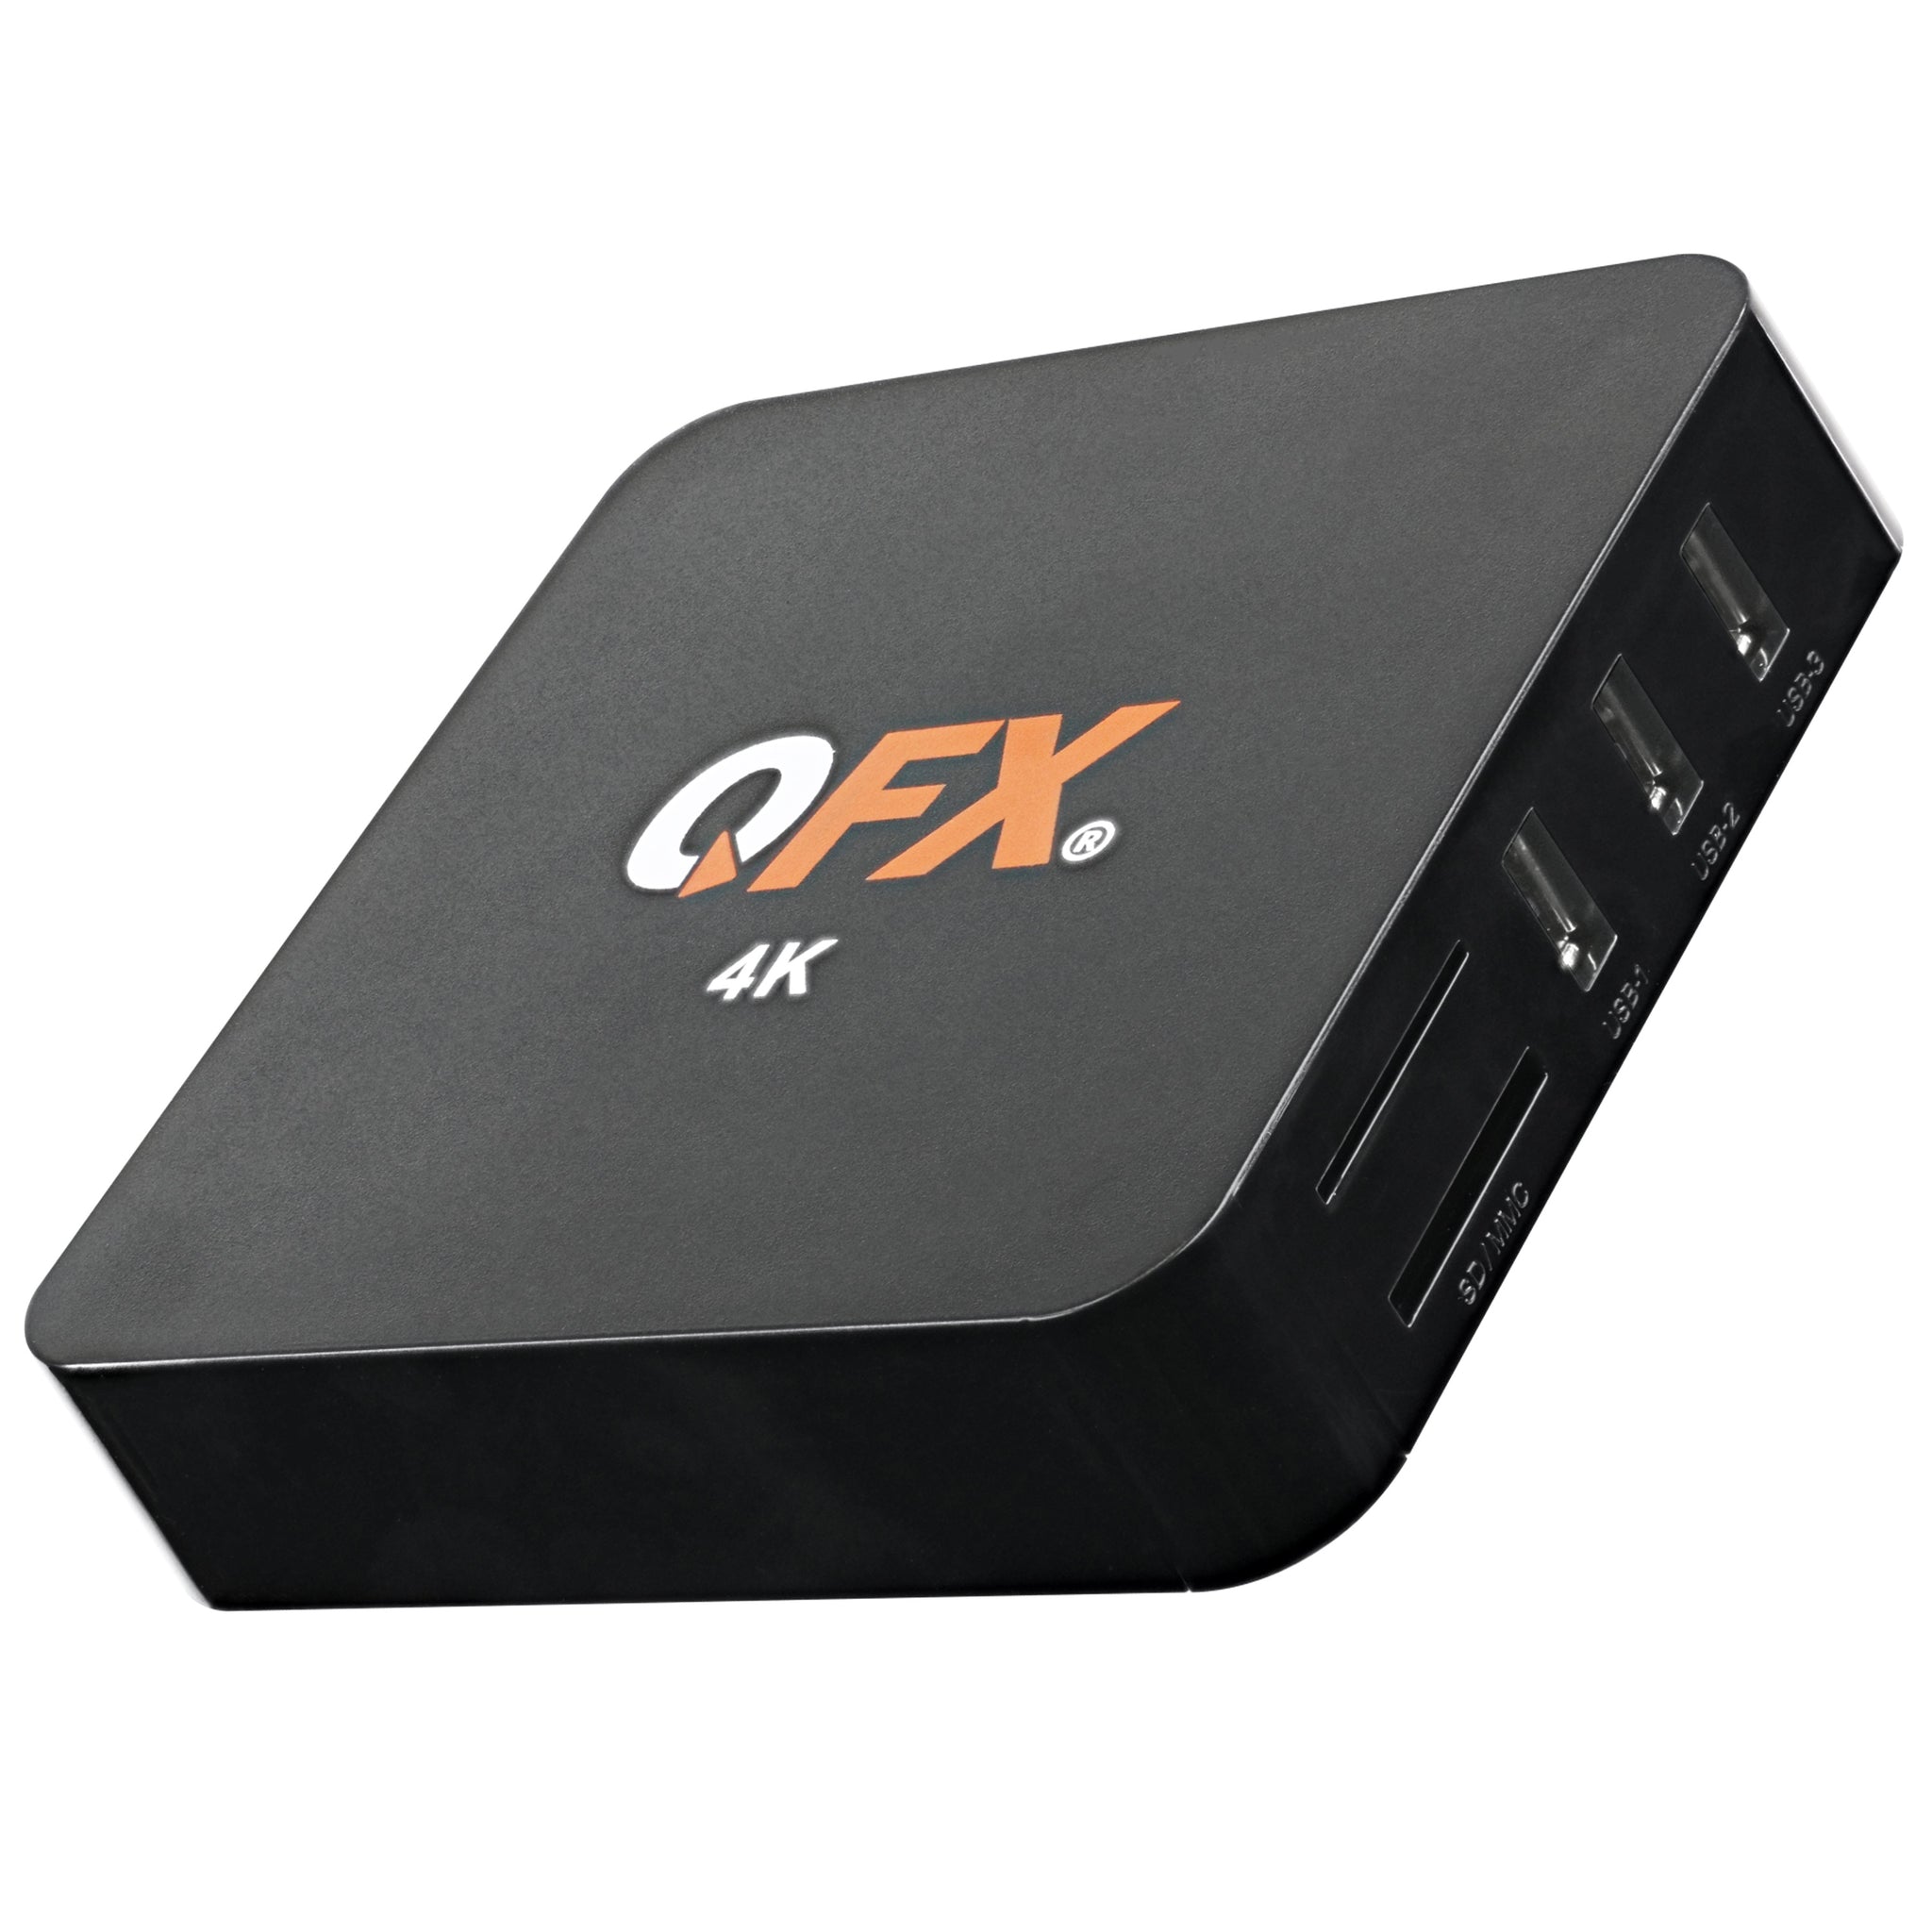 Box TV android 4K